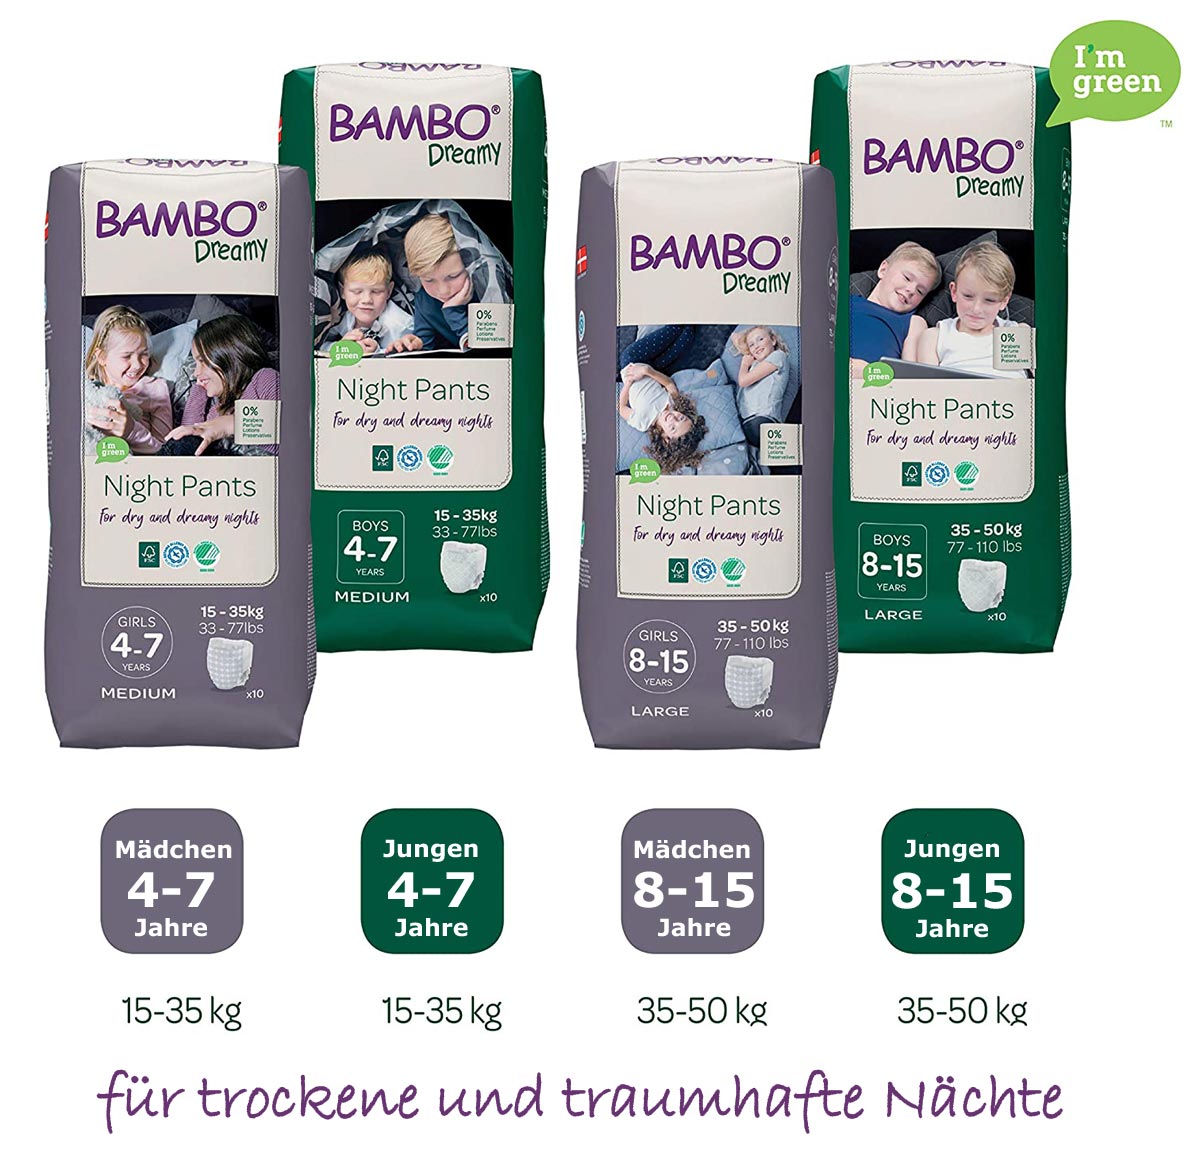 Bambo Dreamy - Night Pants Junge / Boy - 8 bis 15 Jahre (35-50 kg) - 10 St. Pack